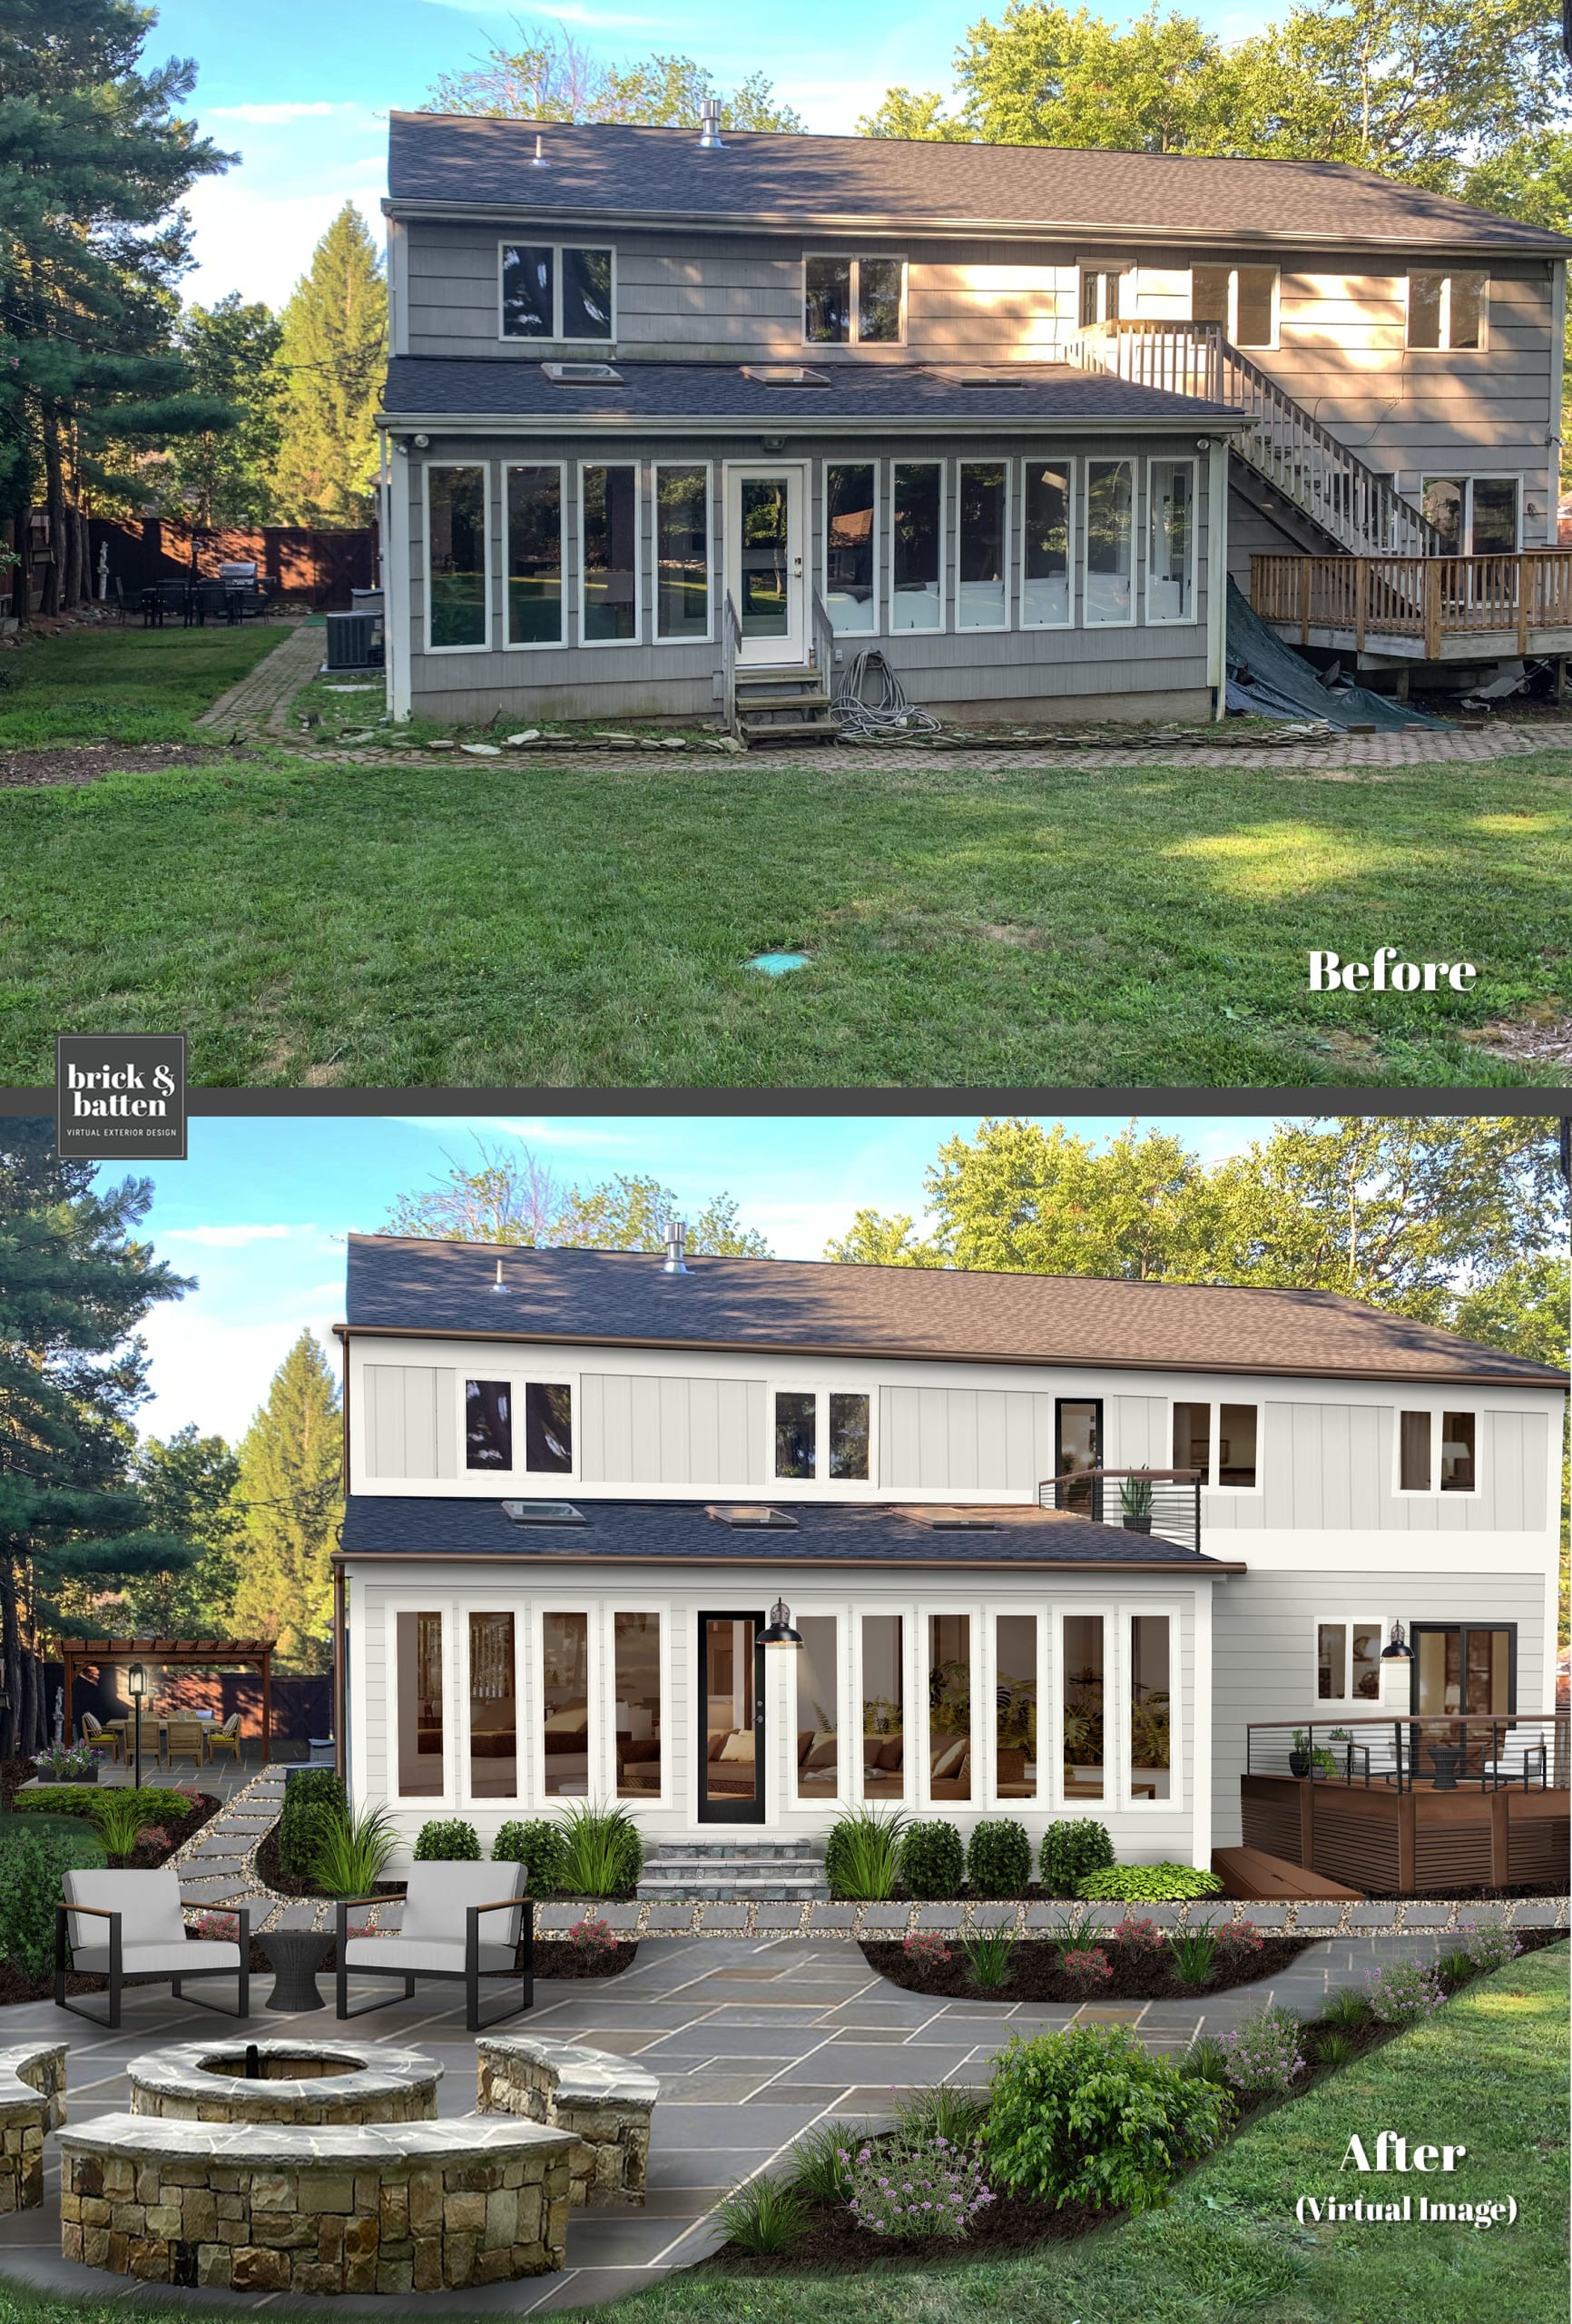 9 Lovely Exterior Design Ideas and Photos for the Back of Your Home